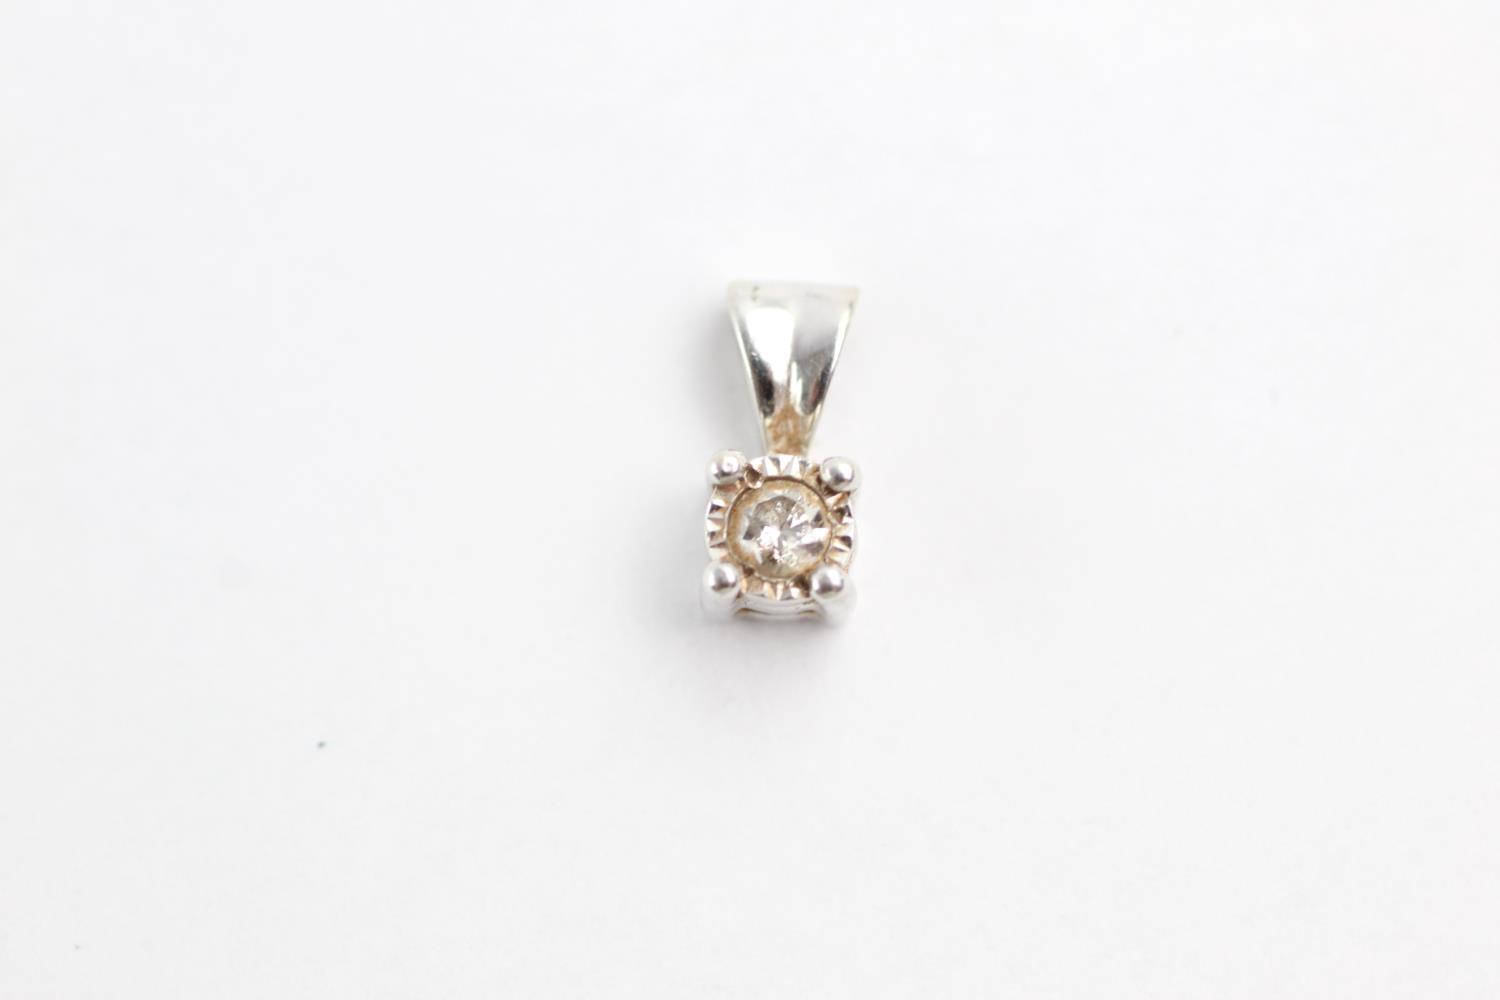 2 x 9ct white gold diamond pendant and stud earrings set (1.8g) - Image 3 of 5